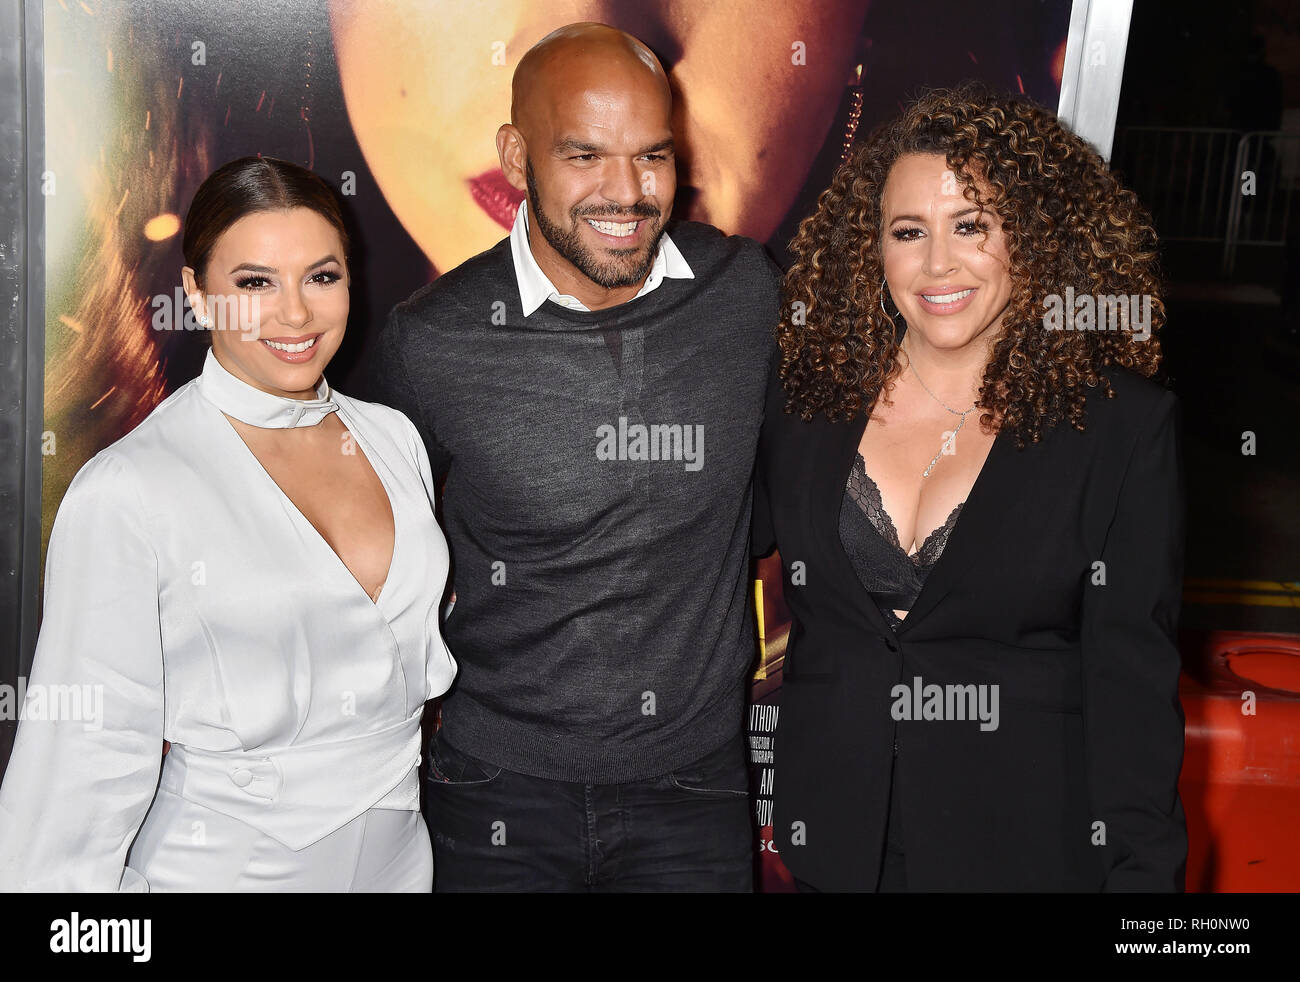 Los Angeles, California, USA. 30th January, 2019. (L-R) Eva Longoria, Amaury Nolasco and Diana Maria Riva attend the Premiere Of Columbia Pictures' 'Miss Bala' at Regal LA Live Stadium 14 on January 30, 2019 in Los Angeles, California. Credit: Jeffrey Mayer/Alamy Live News Stock Photo